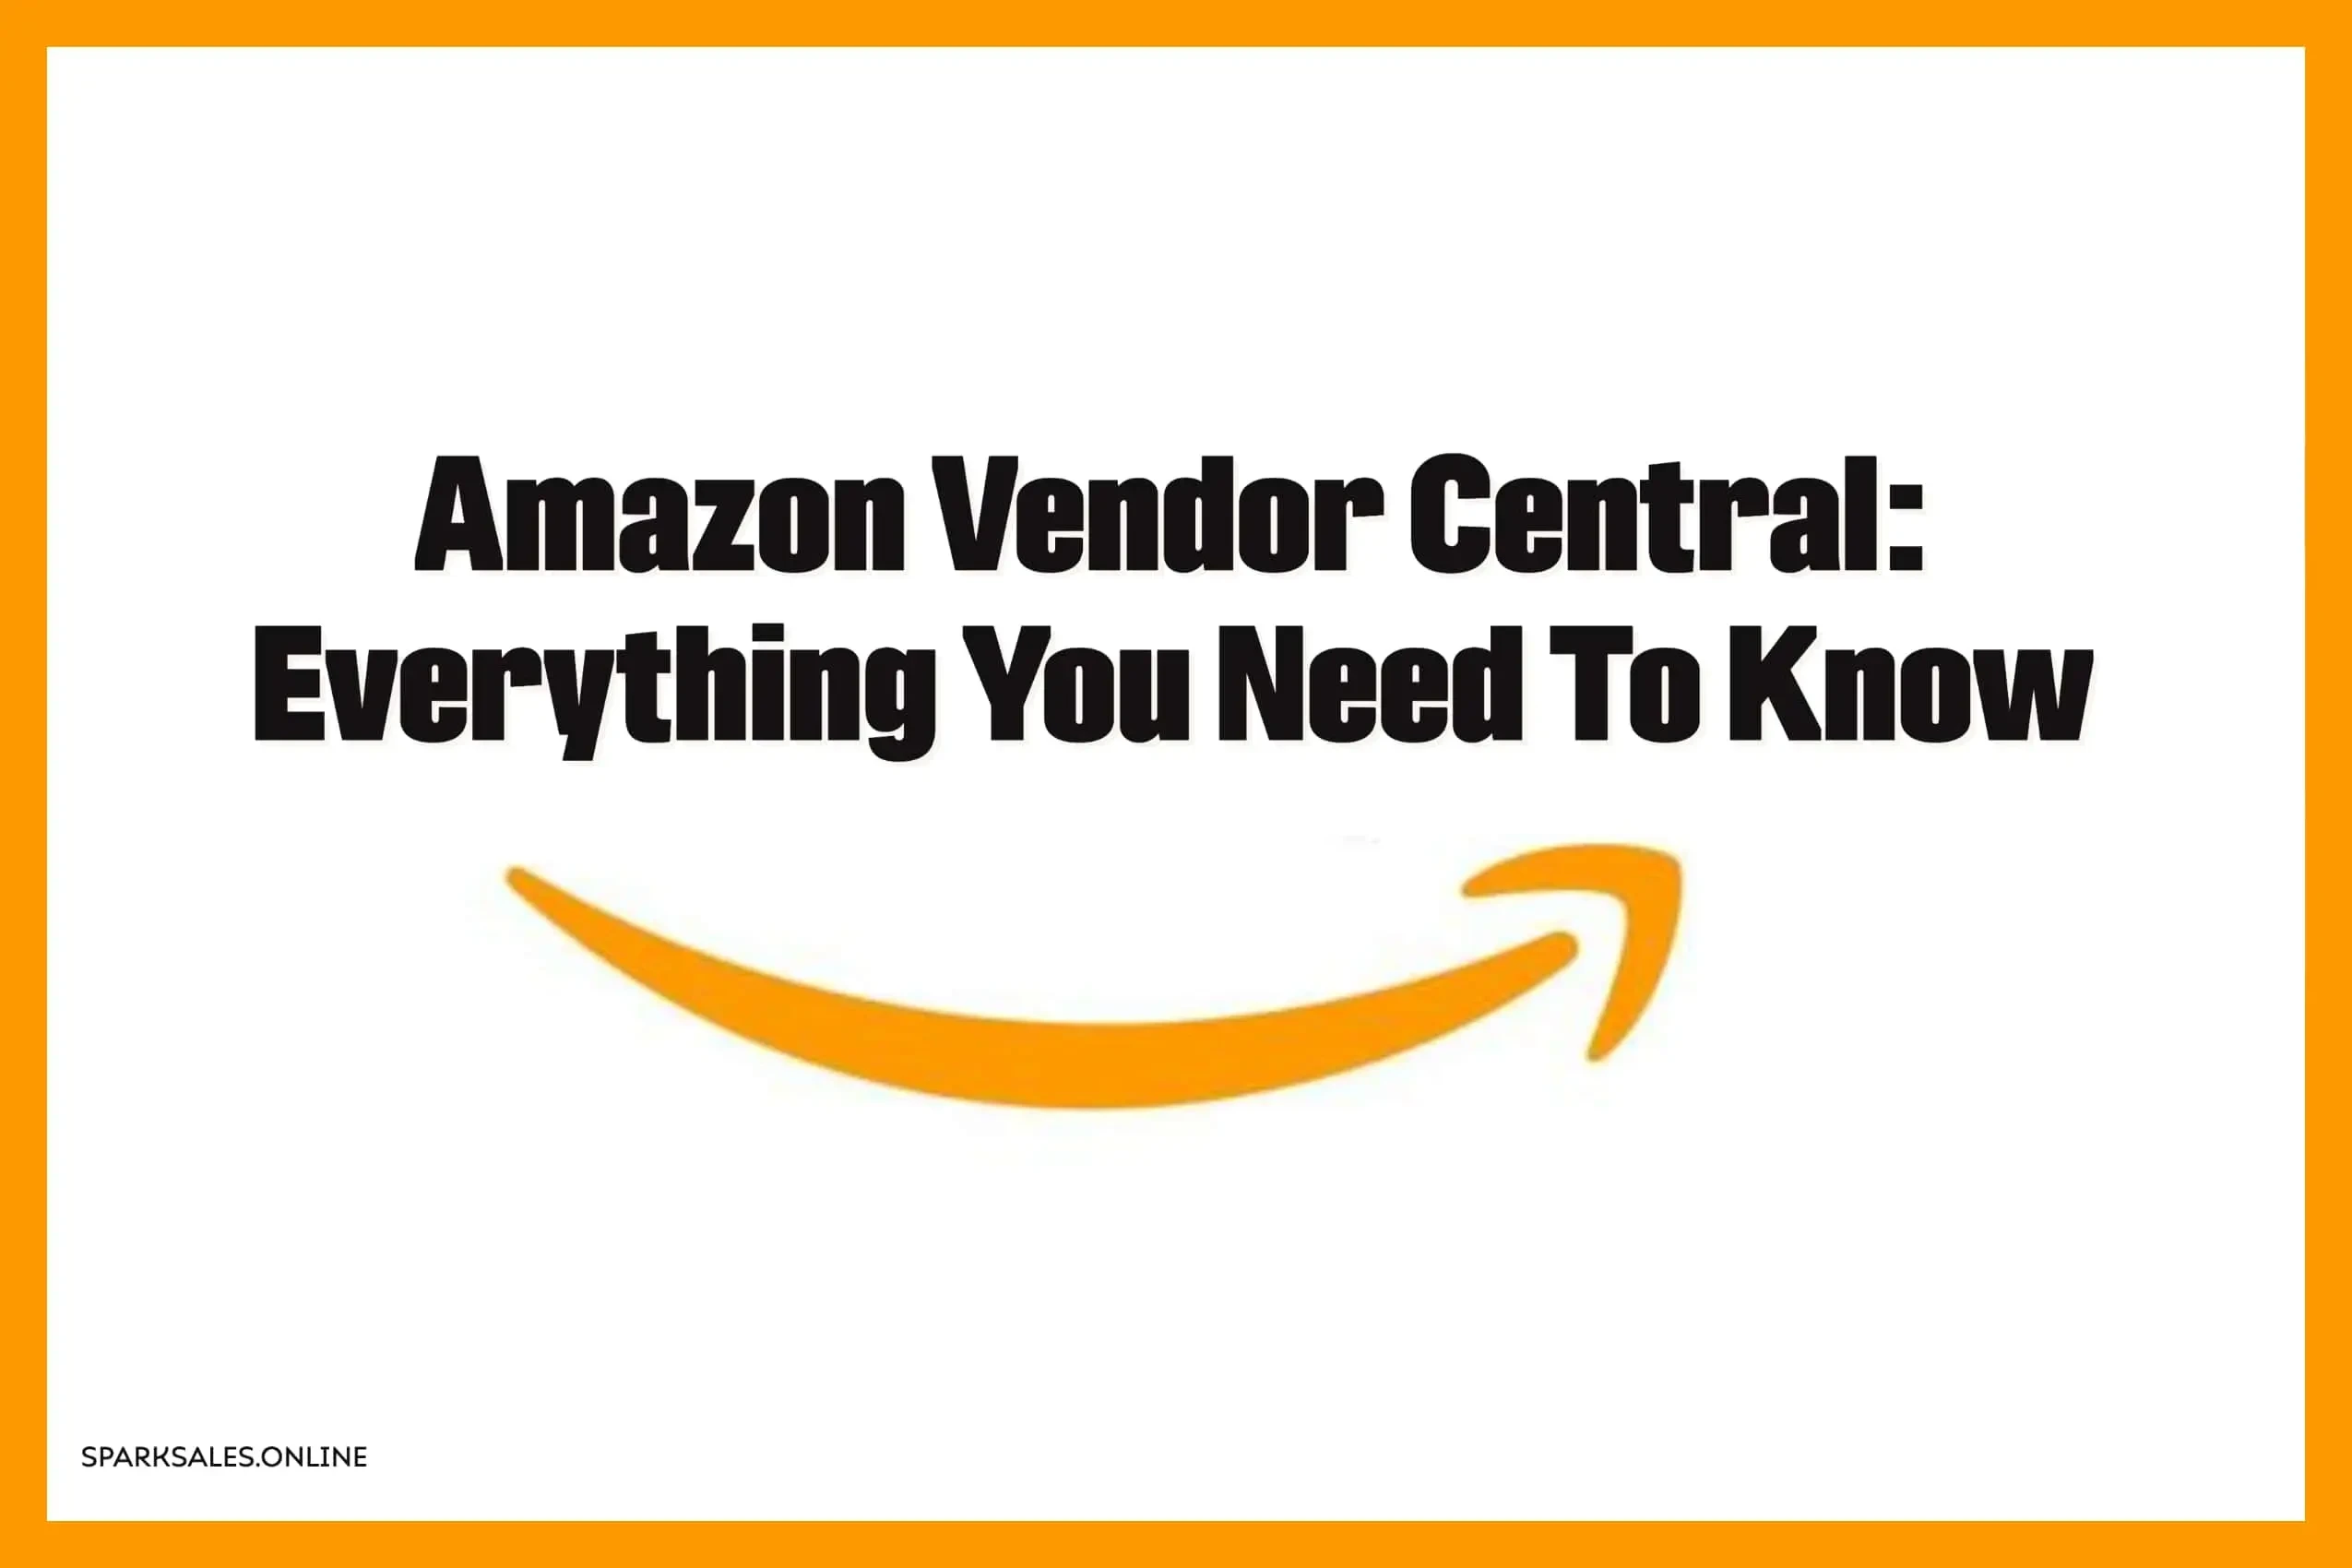 Amazon Vendor Central: Everything You Need To Know